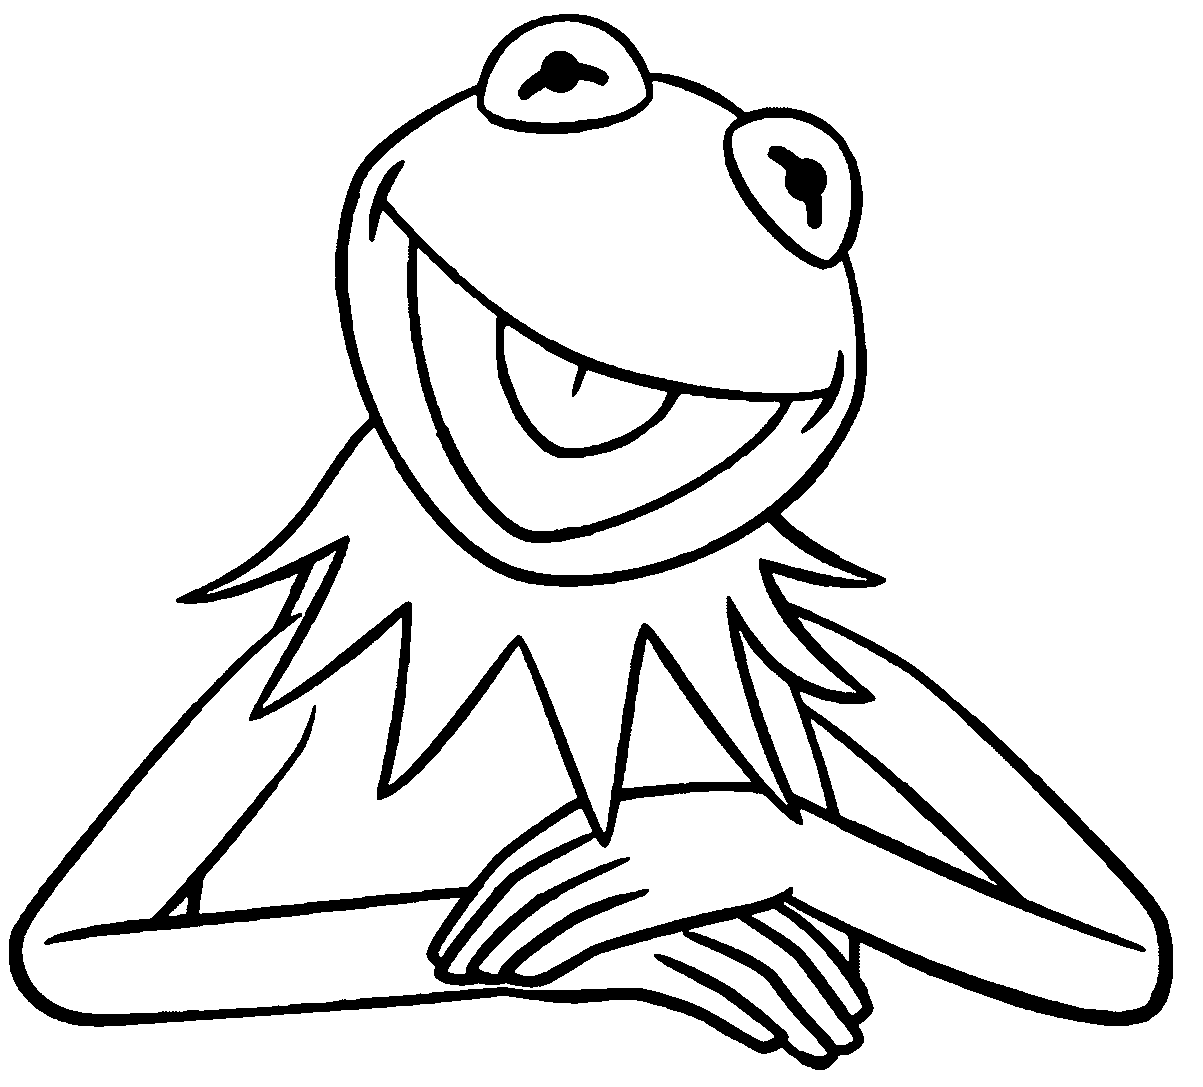 Free Kermit The Frog Coloring Page, Download Free Kermit The Frog ...